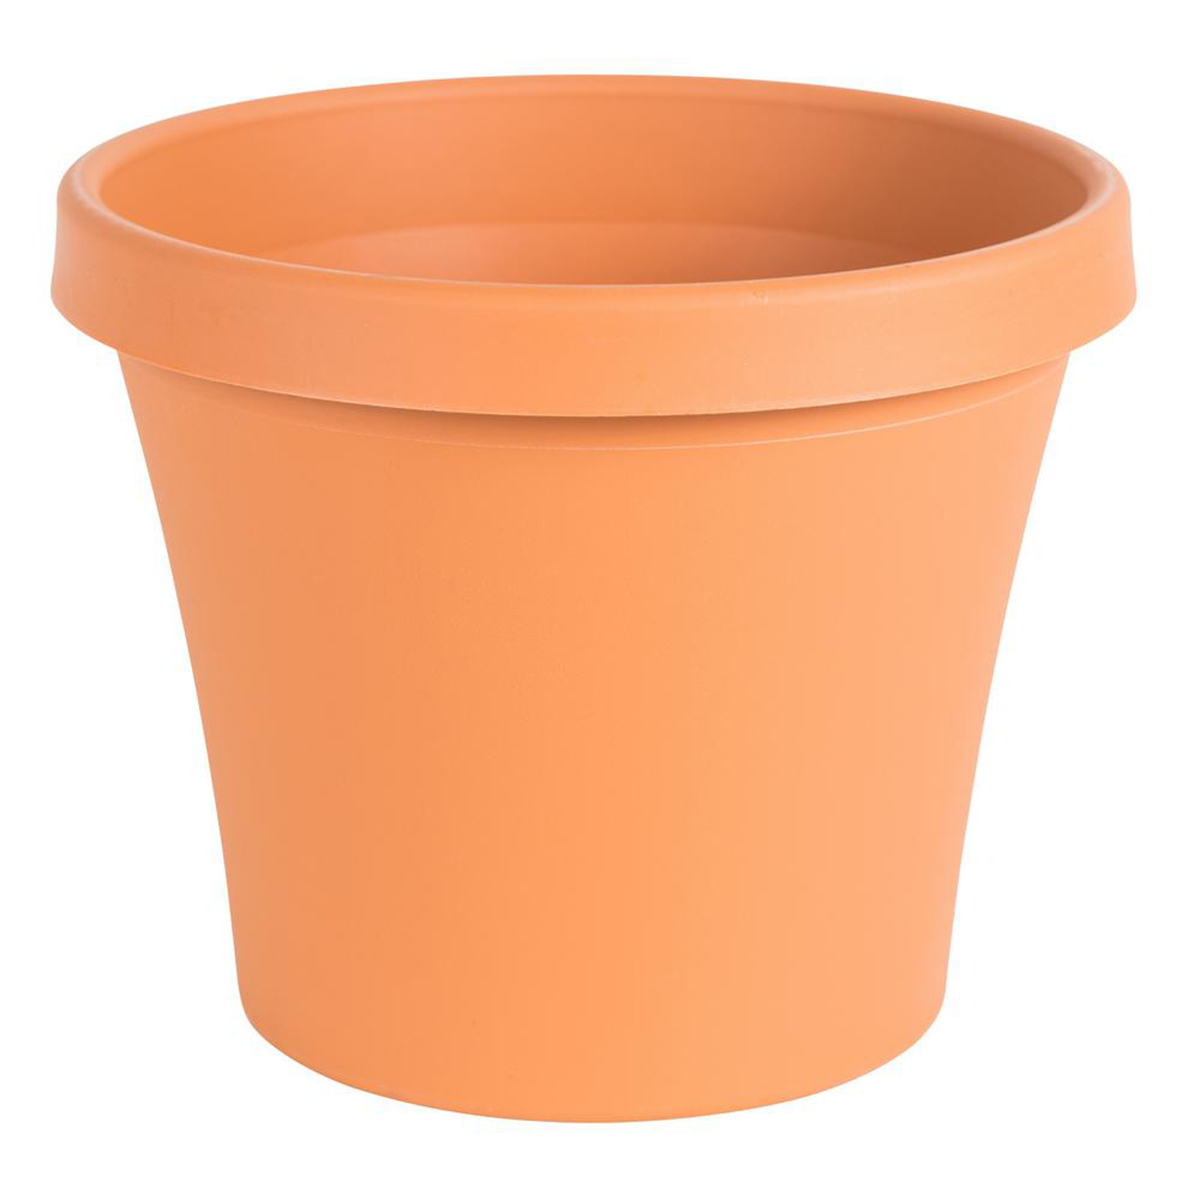 Terrapot Plastic Planter with Drainage and Tray in 16 inch Diameter